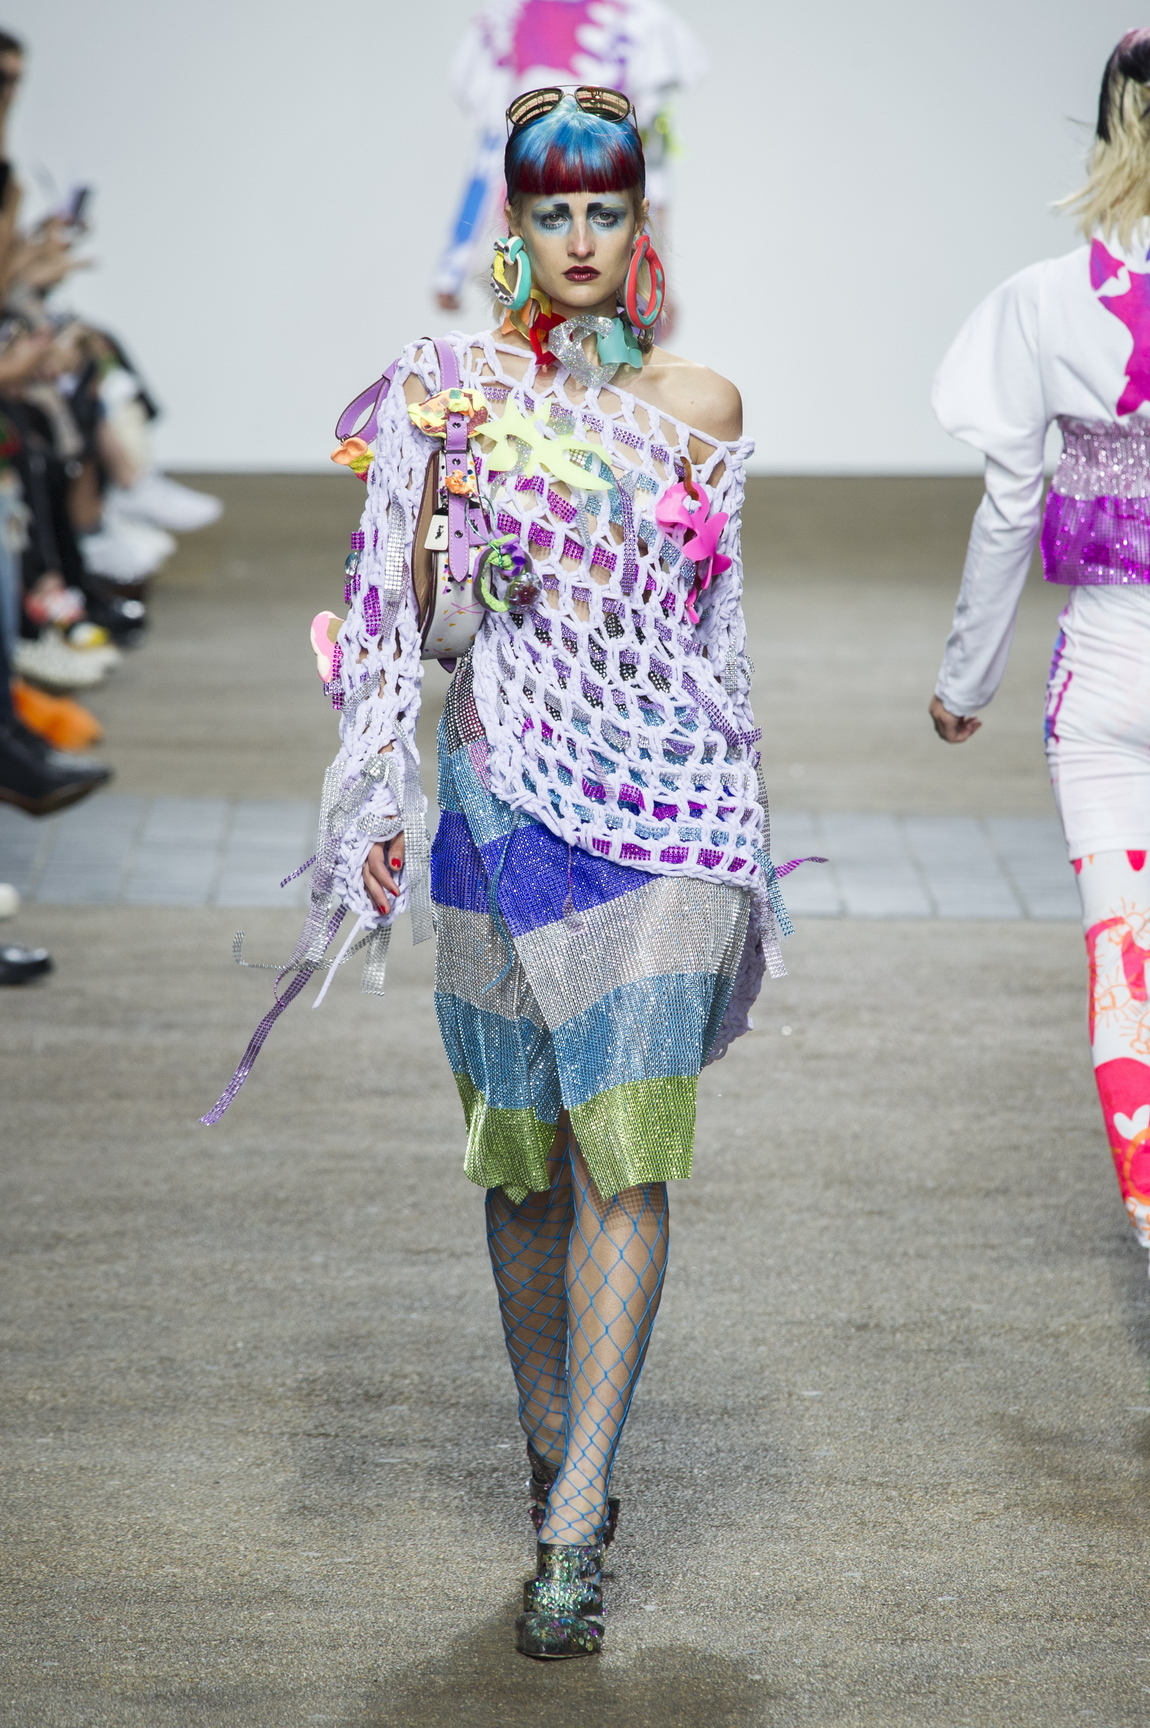 fashion east: mythical club creatures, a toxic paradise, and sculptural ...